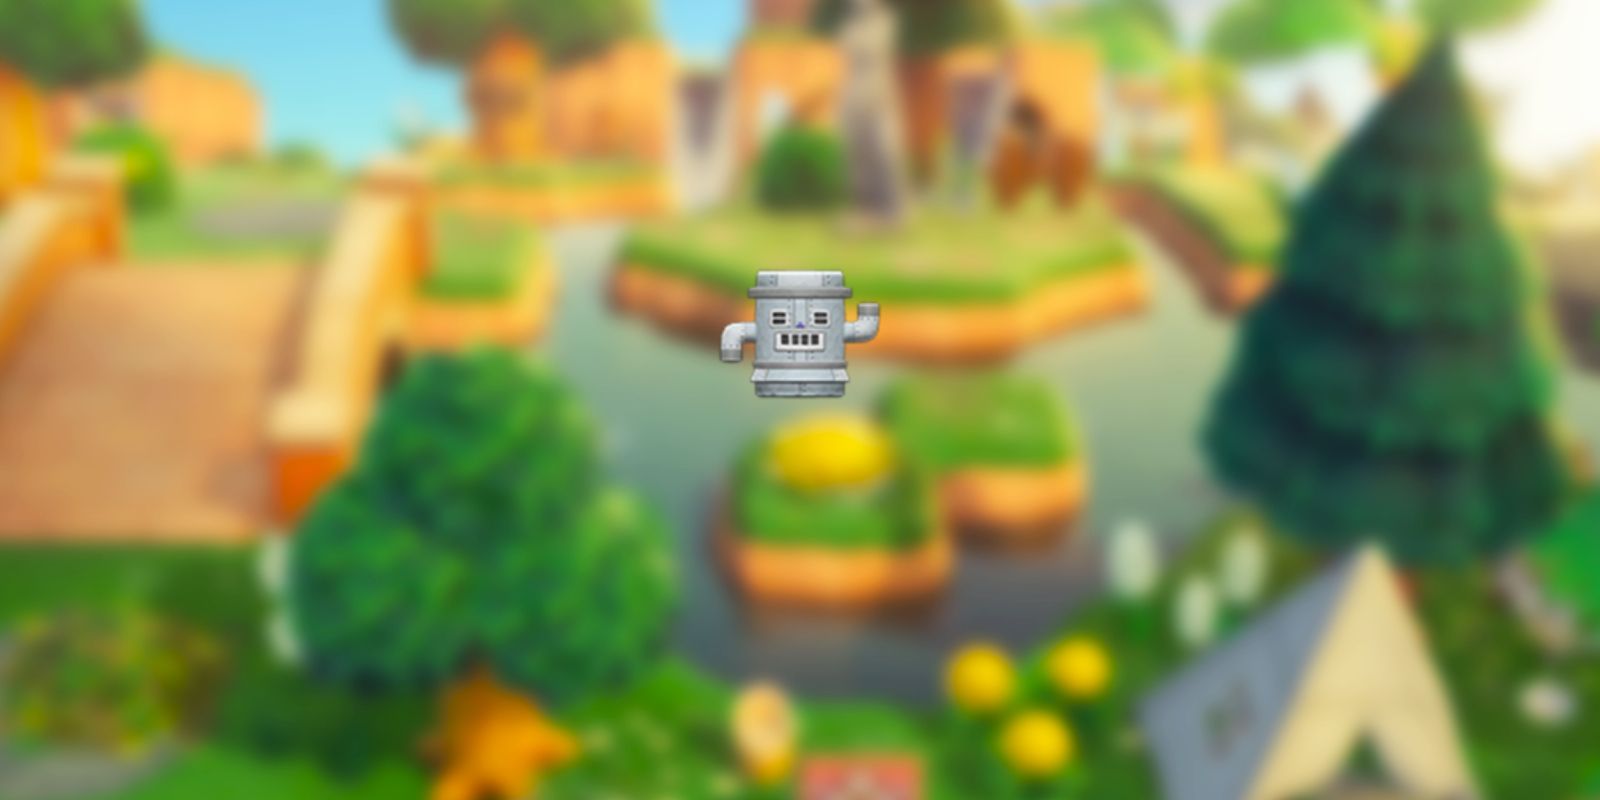 All New Gyroids In Animal Crossing 2.0 Aluminoid